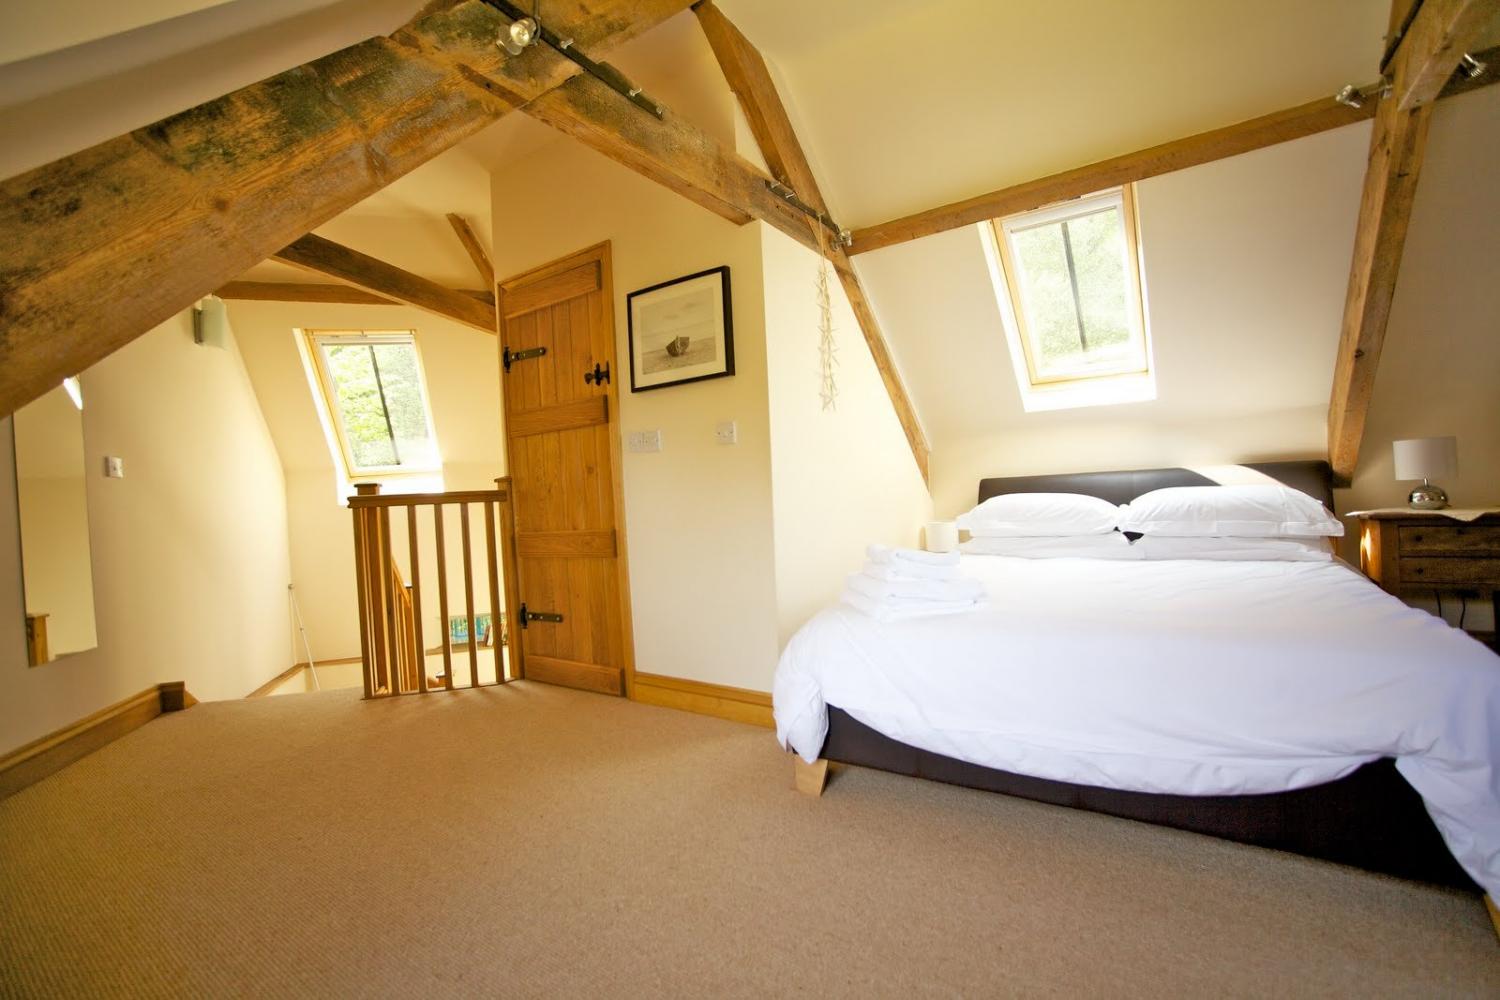 The Coach House bedroom